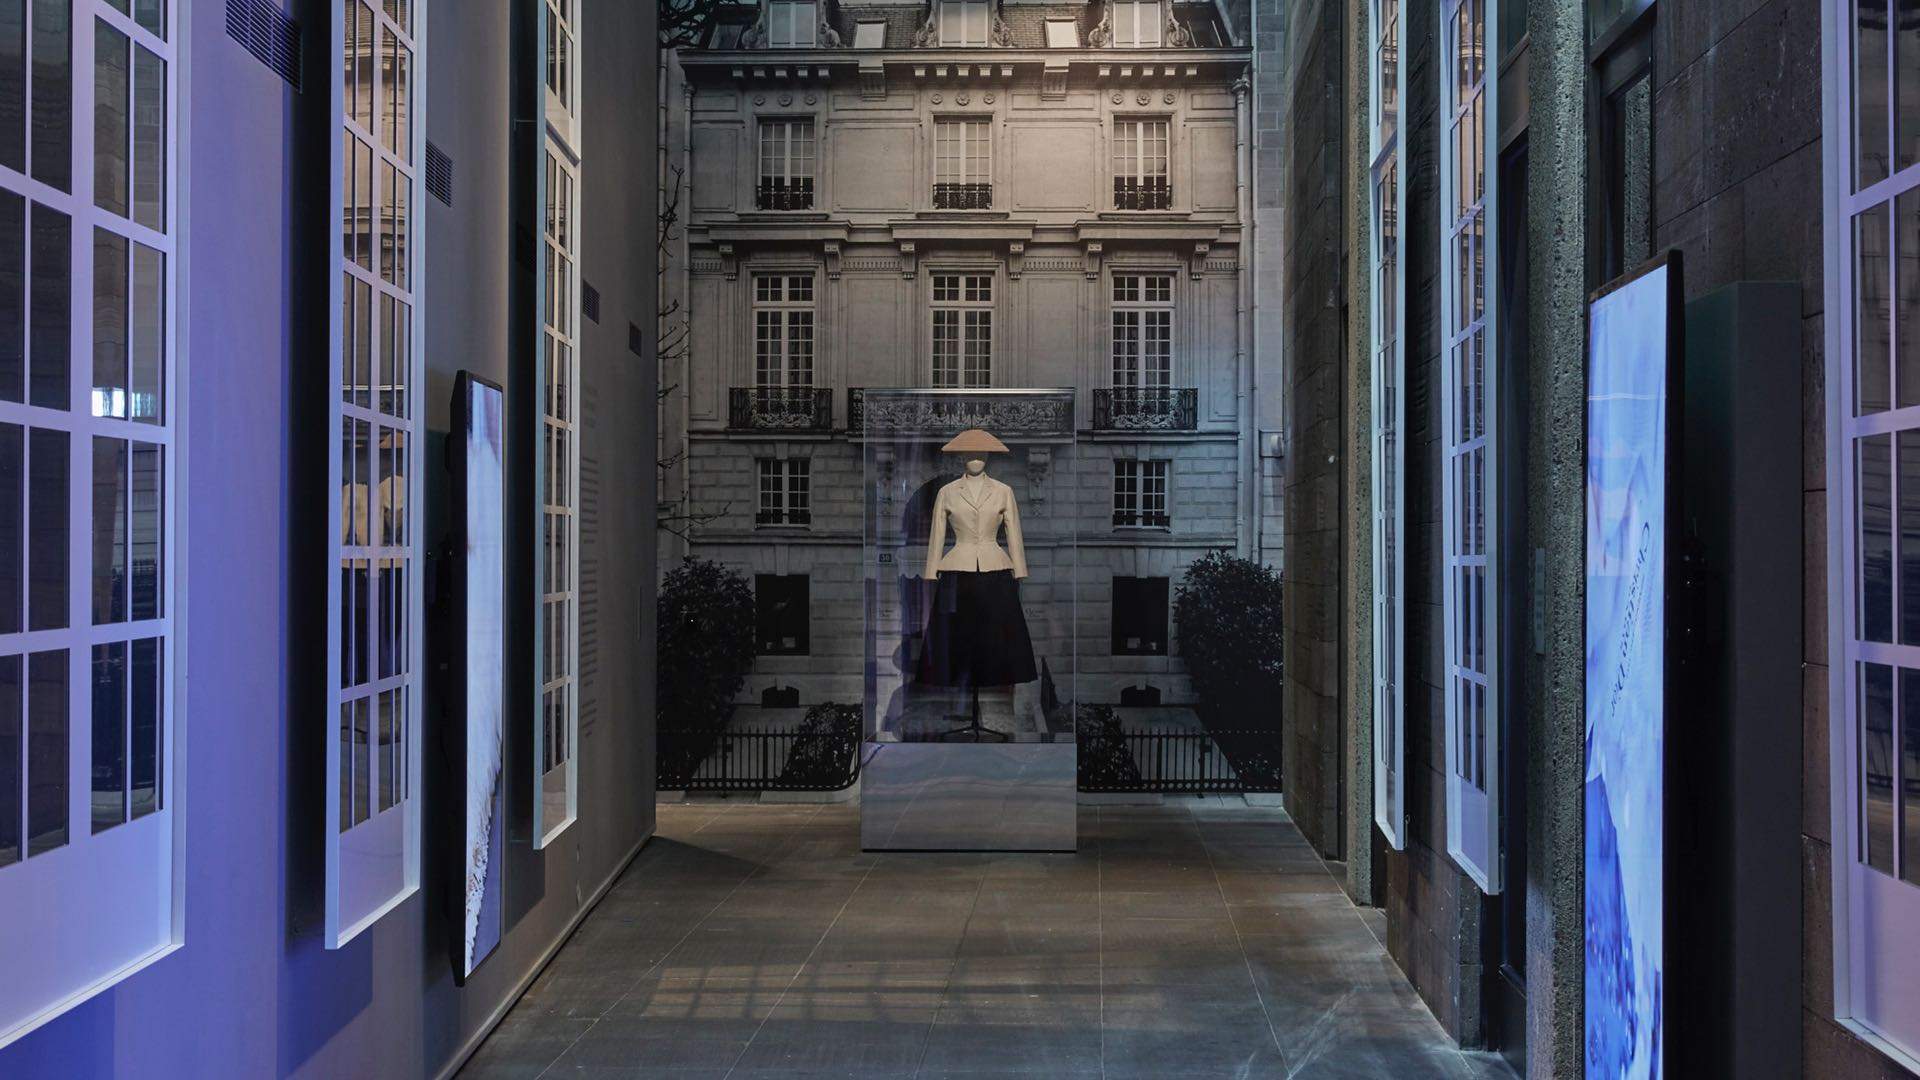 A Look Inside the NGV's Massive New Dior Haute Couture Exhibition